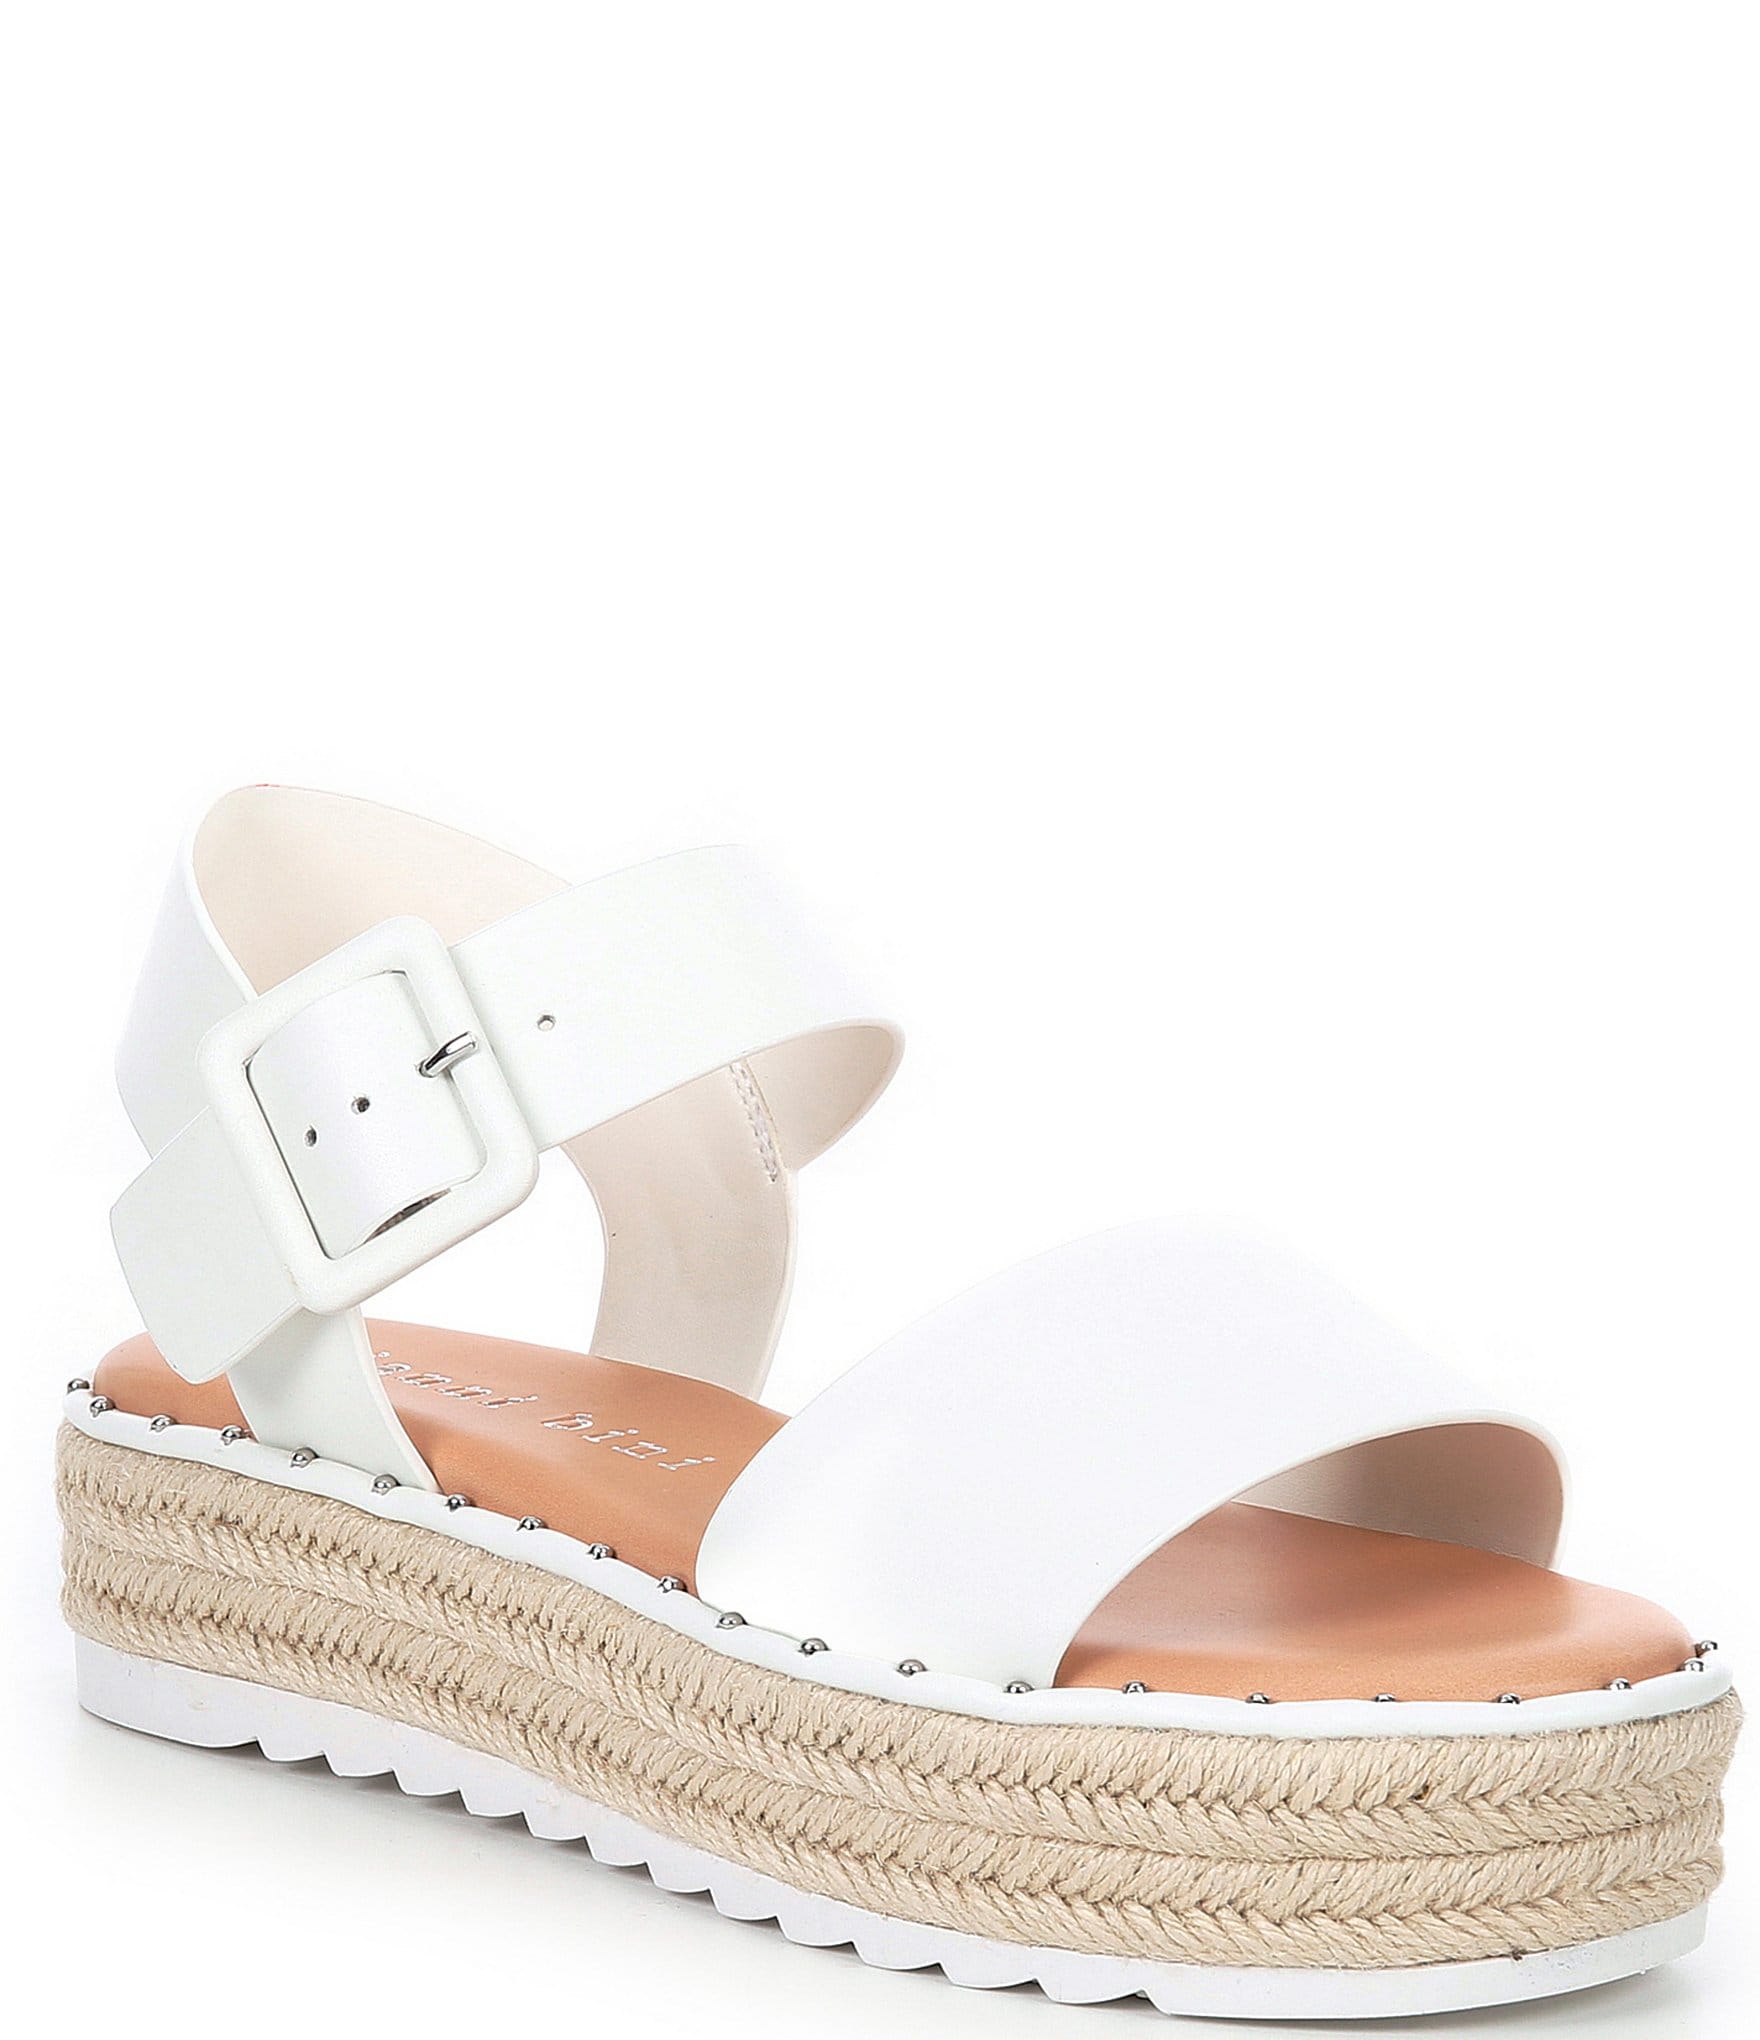 Ravel Espadrille Shoes Leather in White